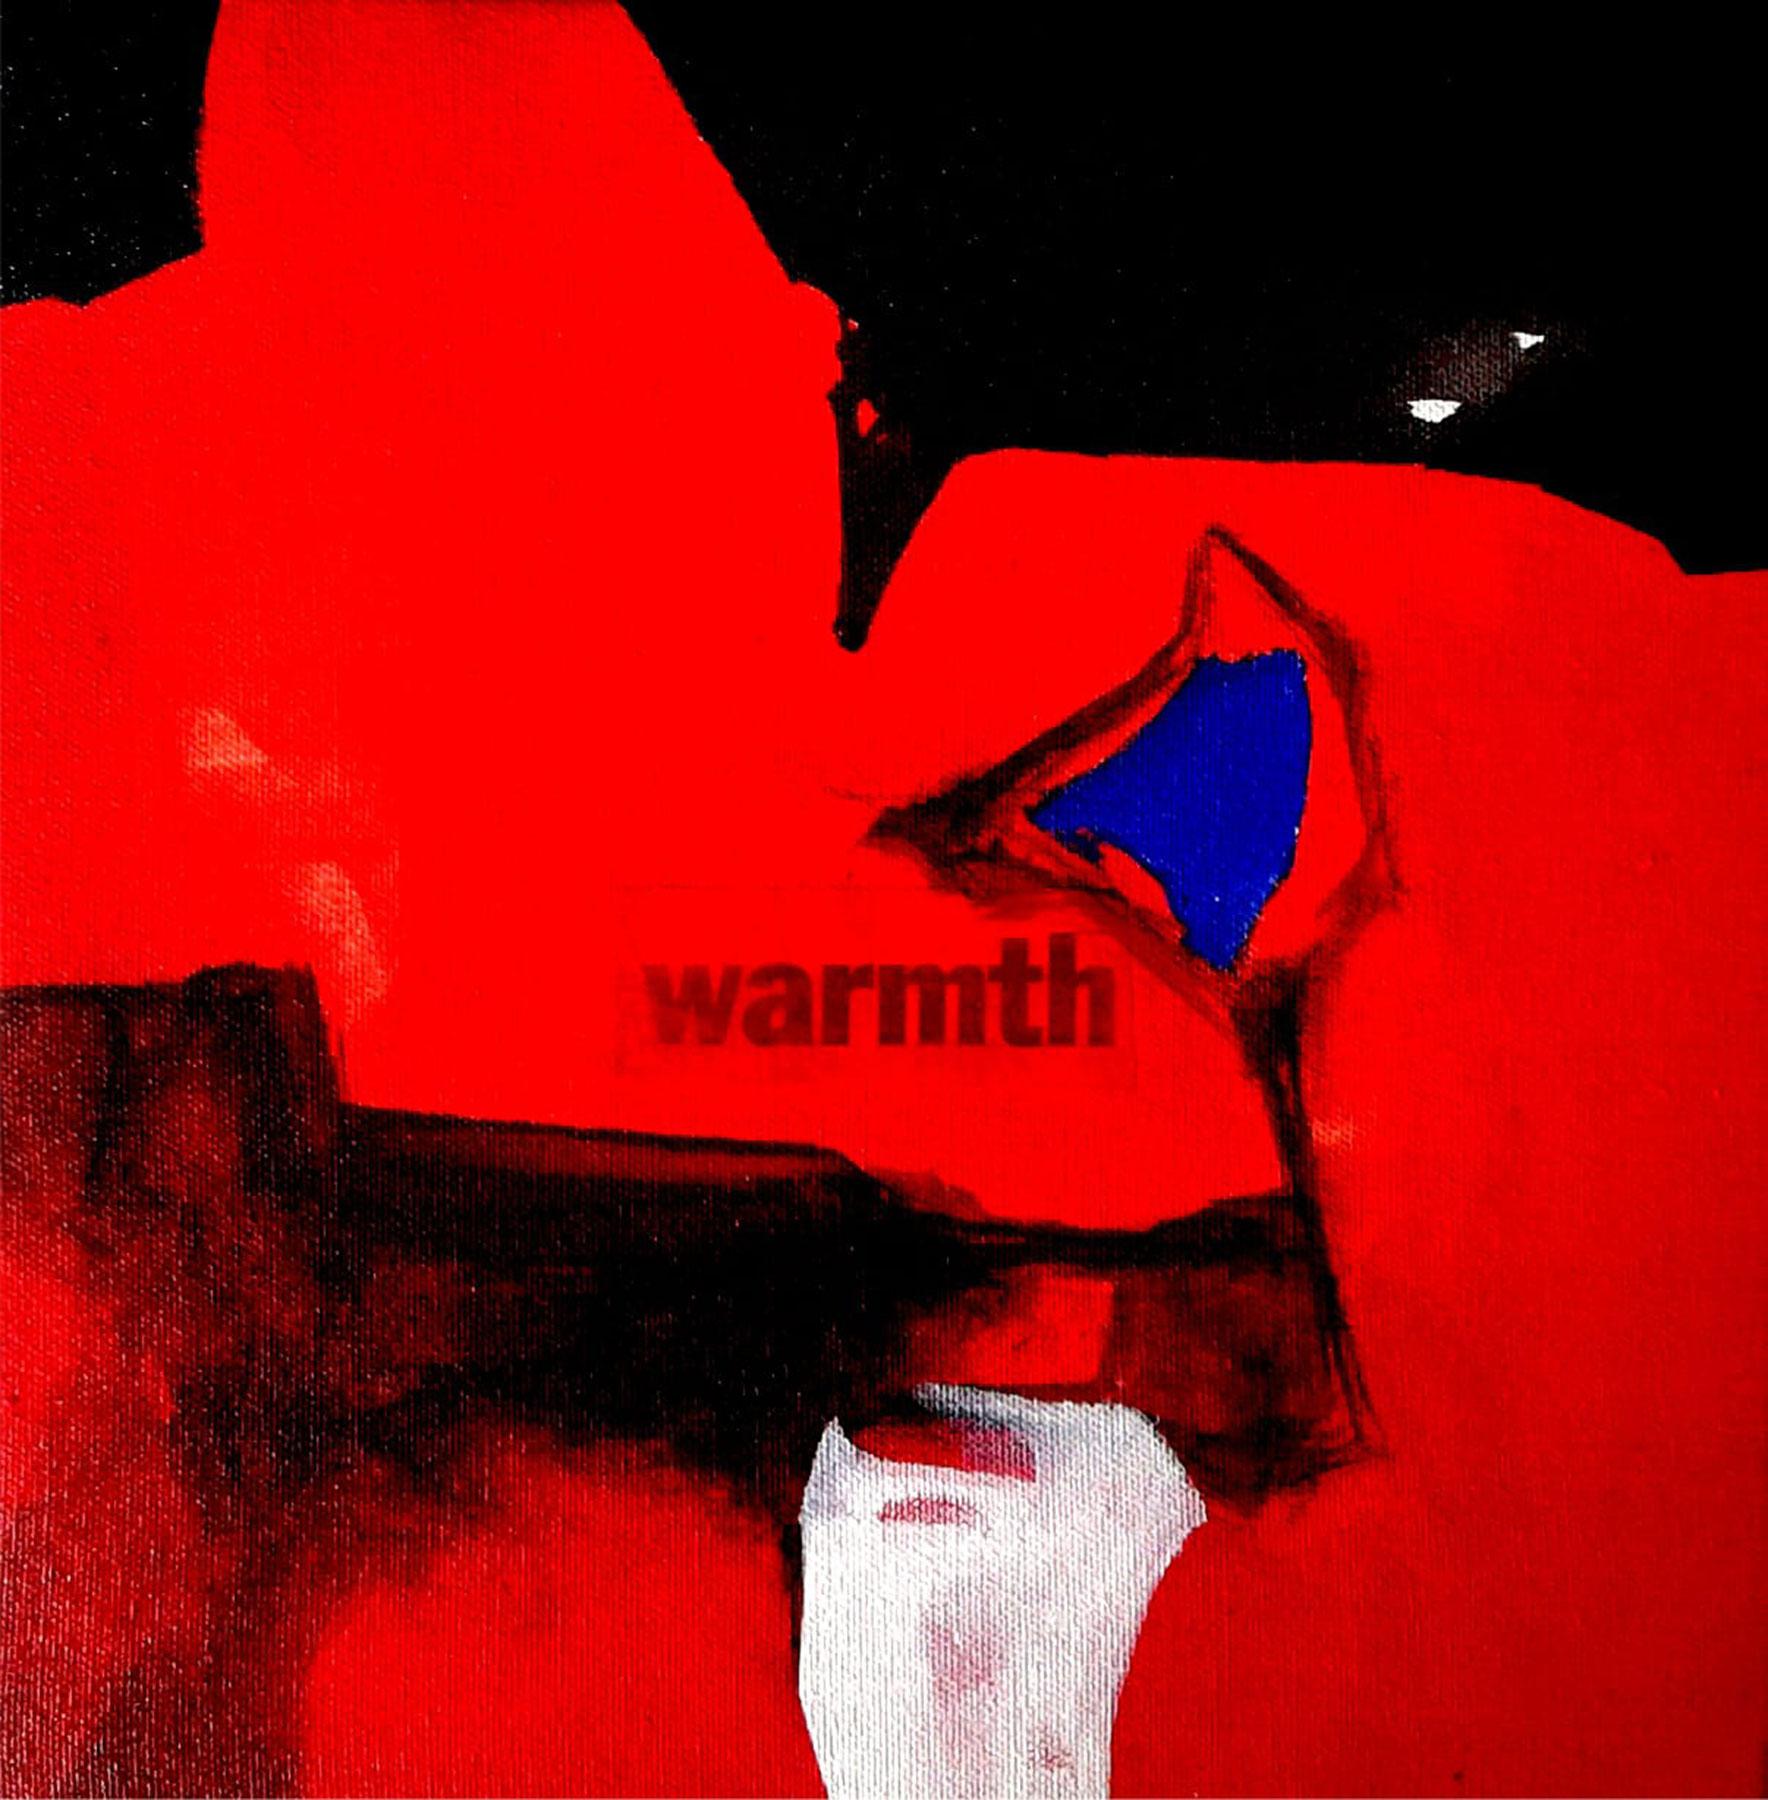 Rathin Kanji Interior Painting - Warmth, Abstract, Arcylic Oil  on Canvas, Red, Black, Blue, White "In Stock"